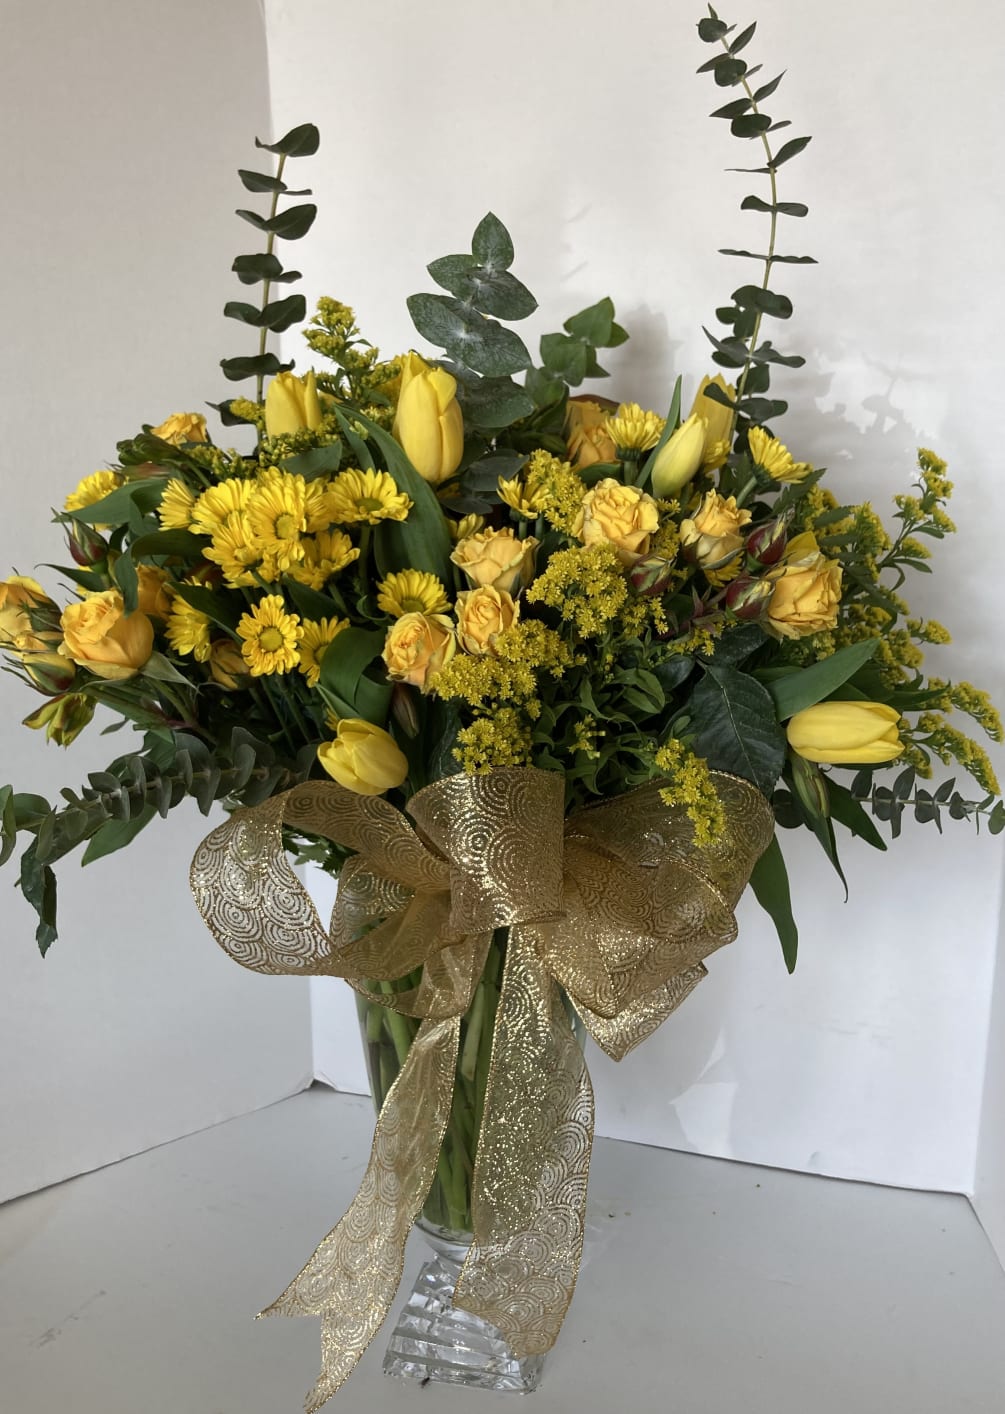 A custom container filled with bright yellow seasonal blooms.